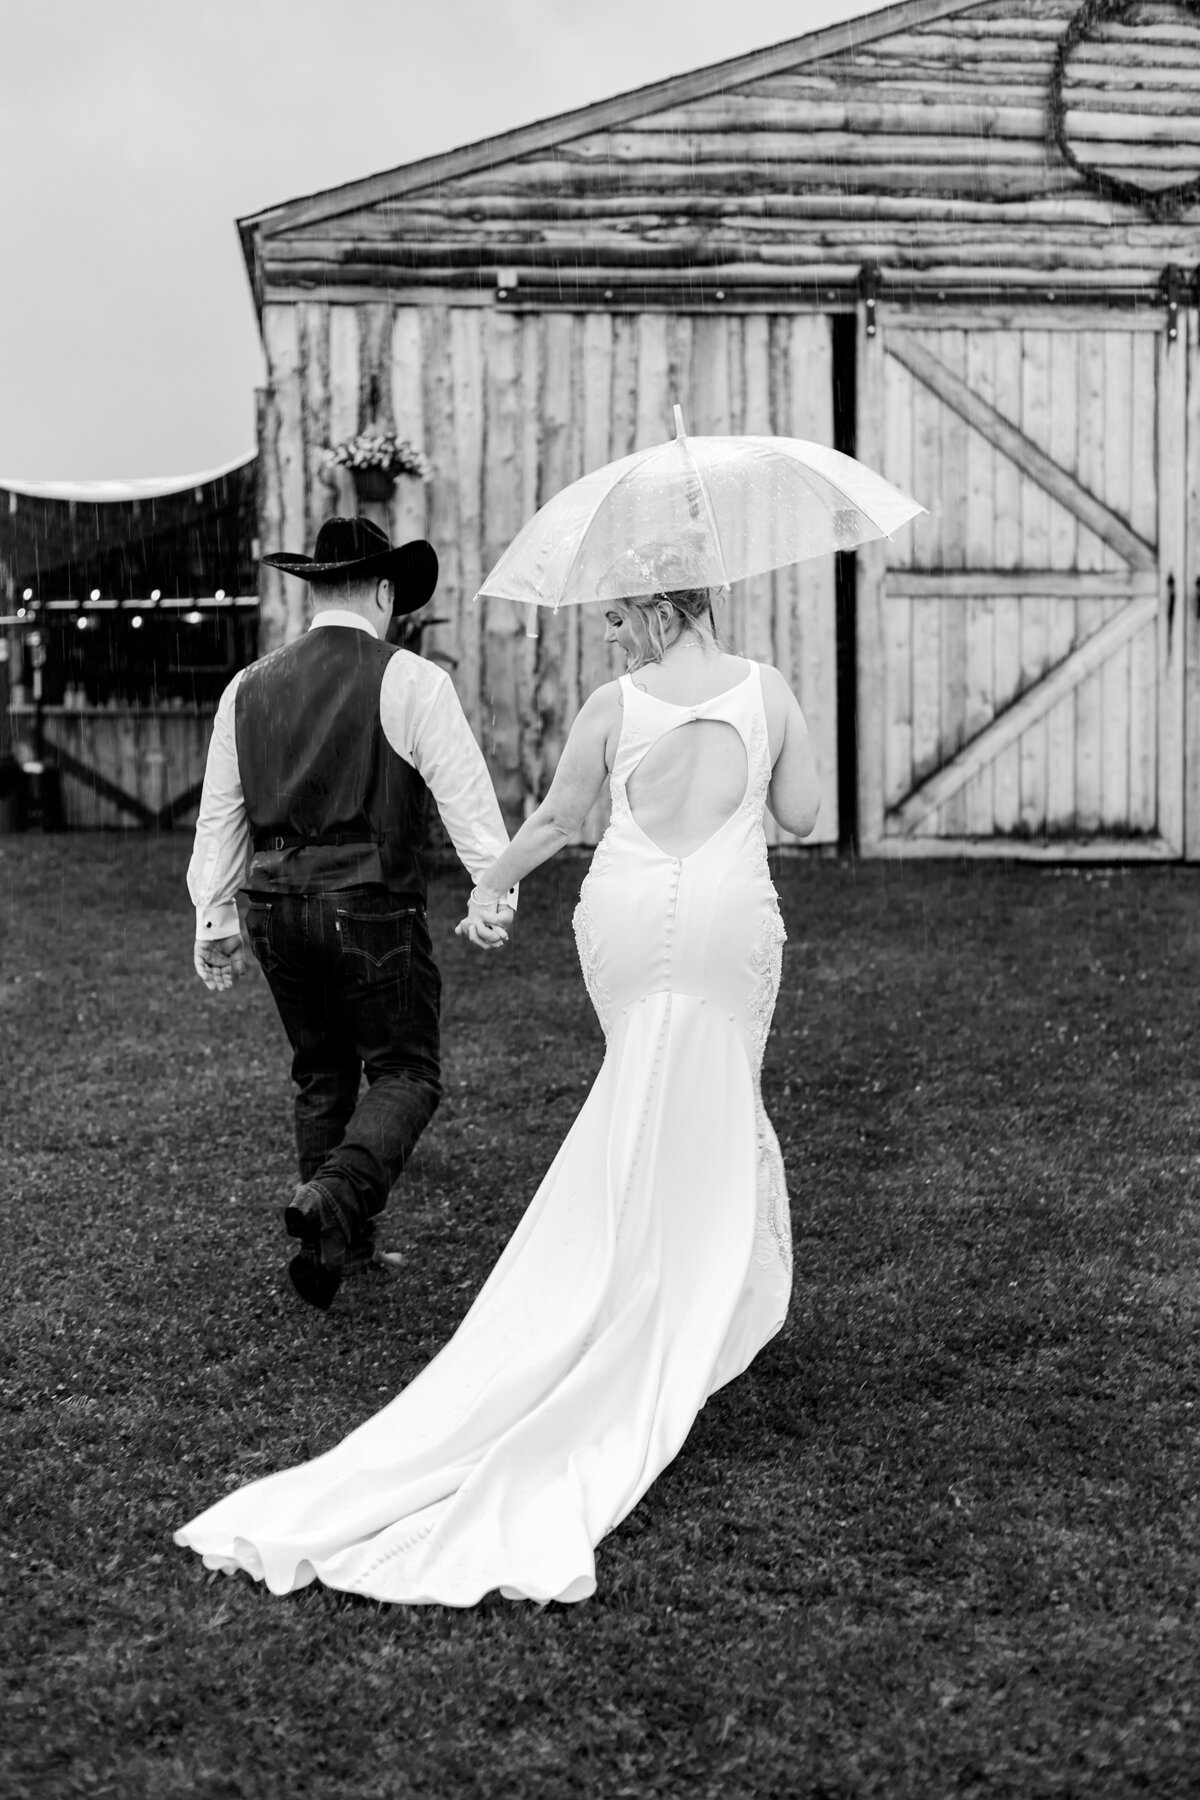 Bride and groom walk towards a barn with an umbrella in hand